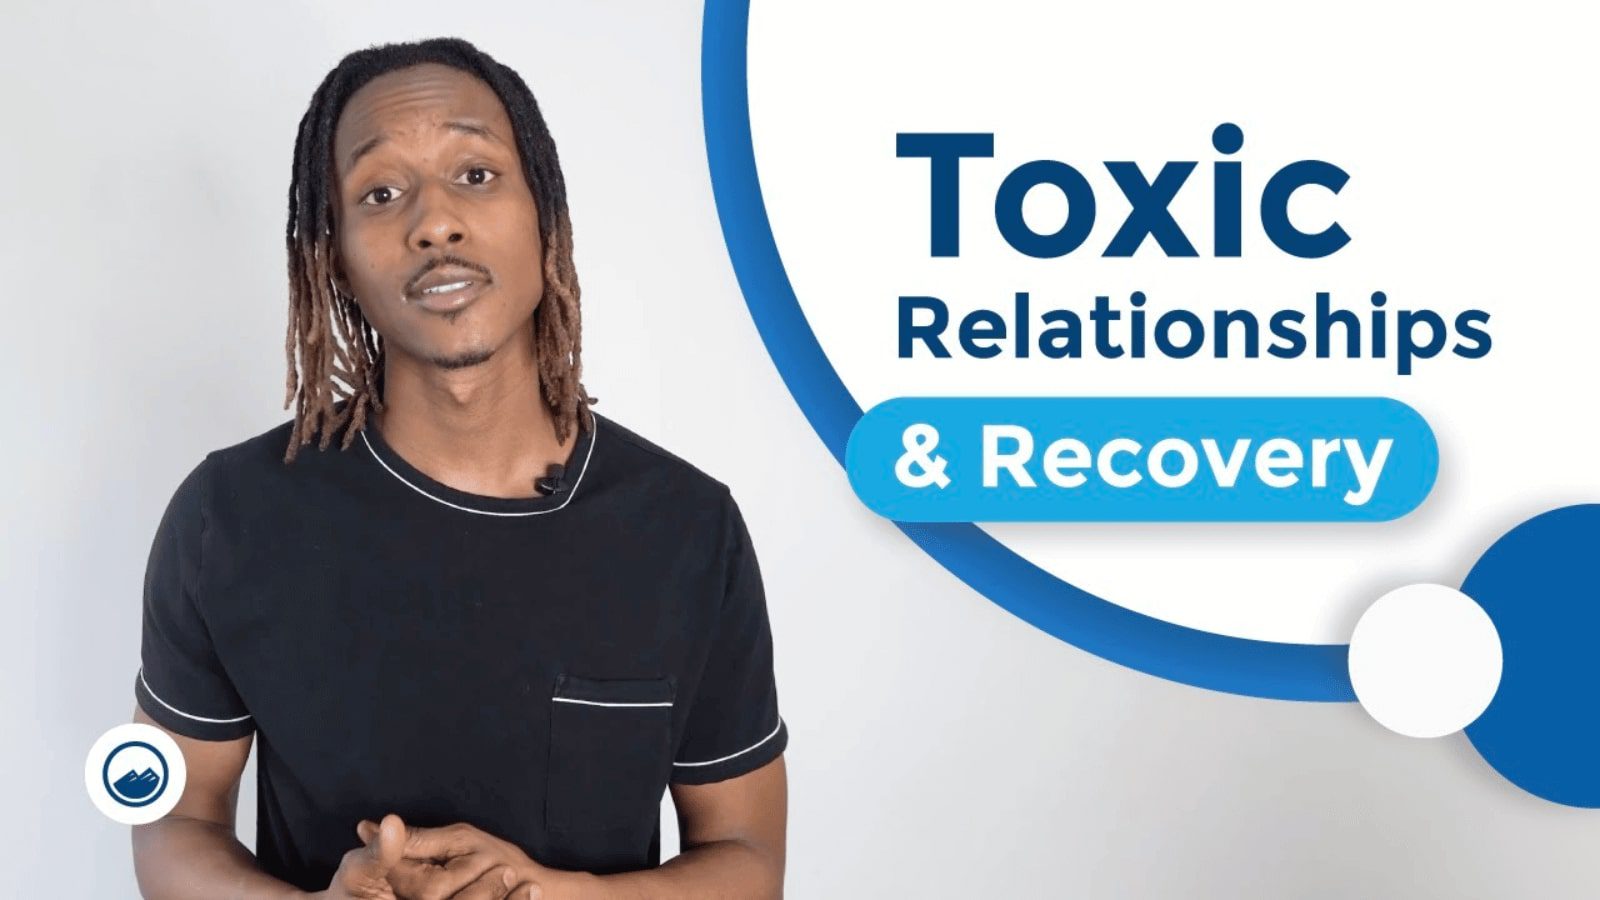 Toxic Relationships & Recovery text written next to an African American explaining the concept